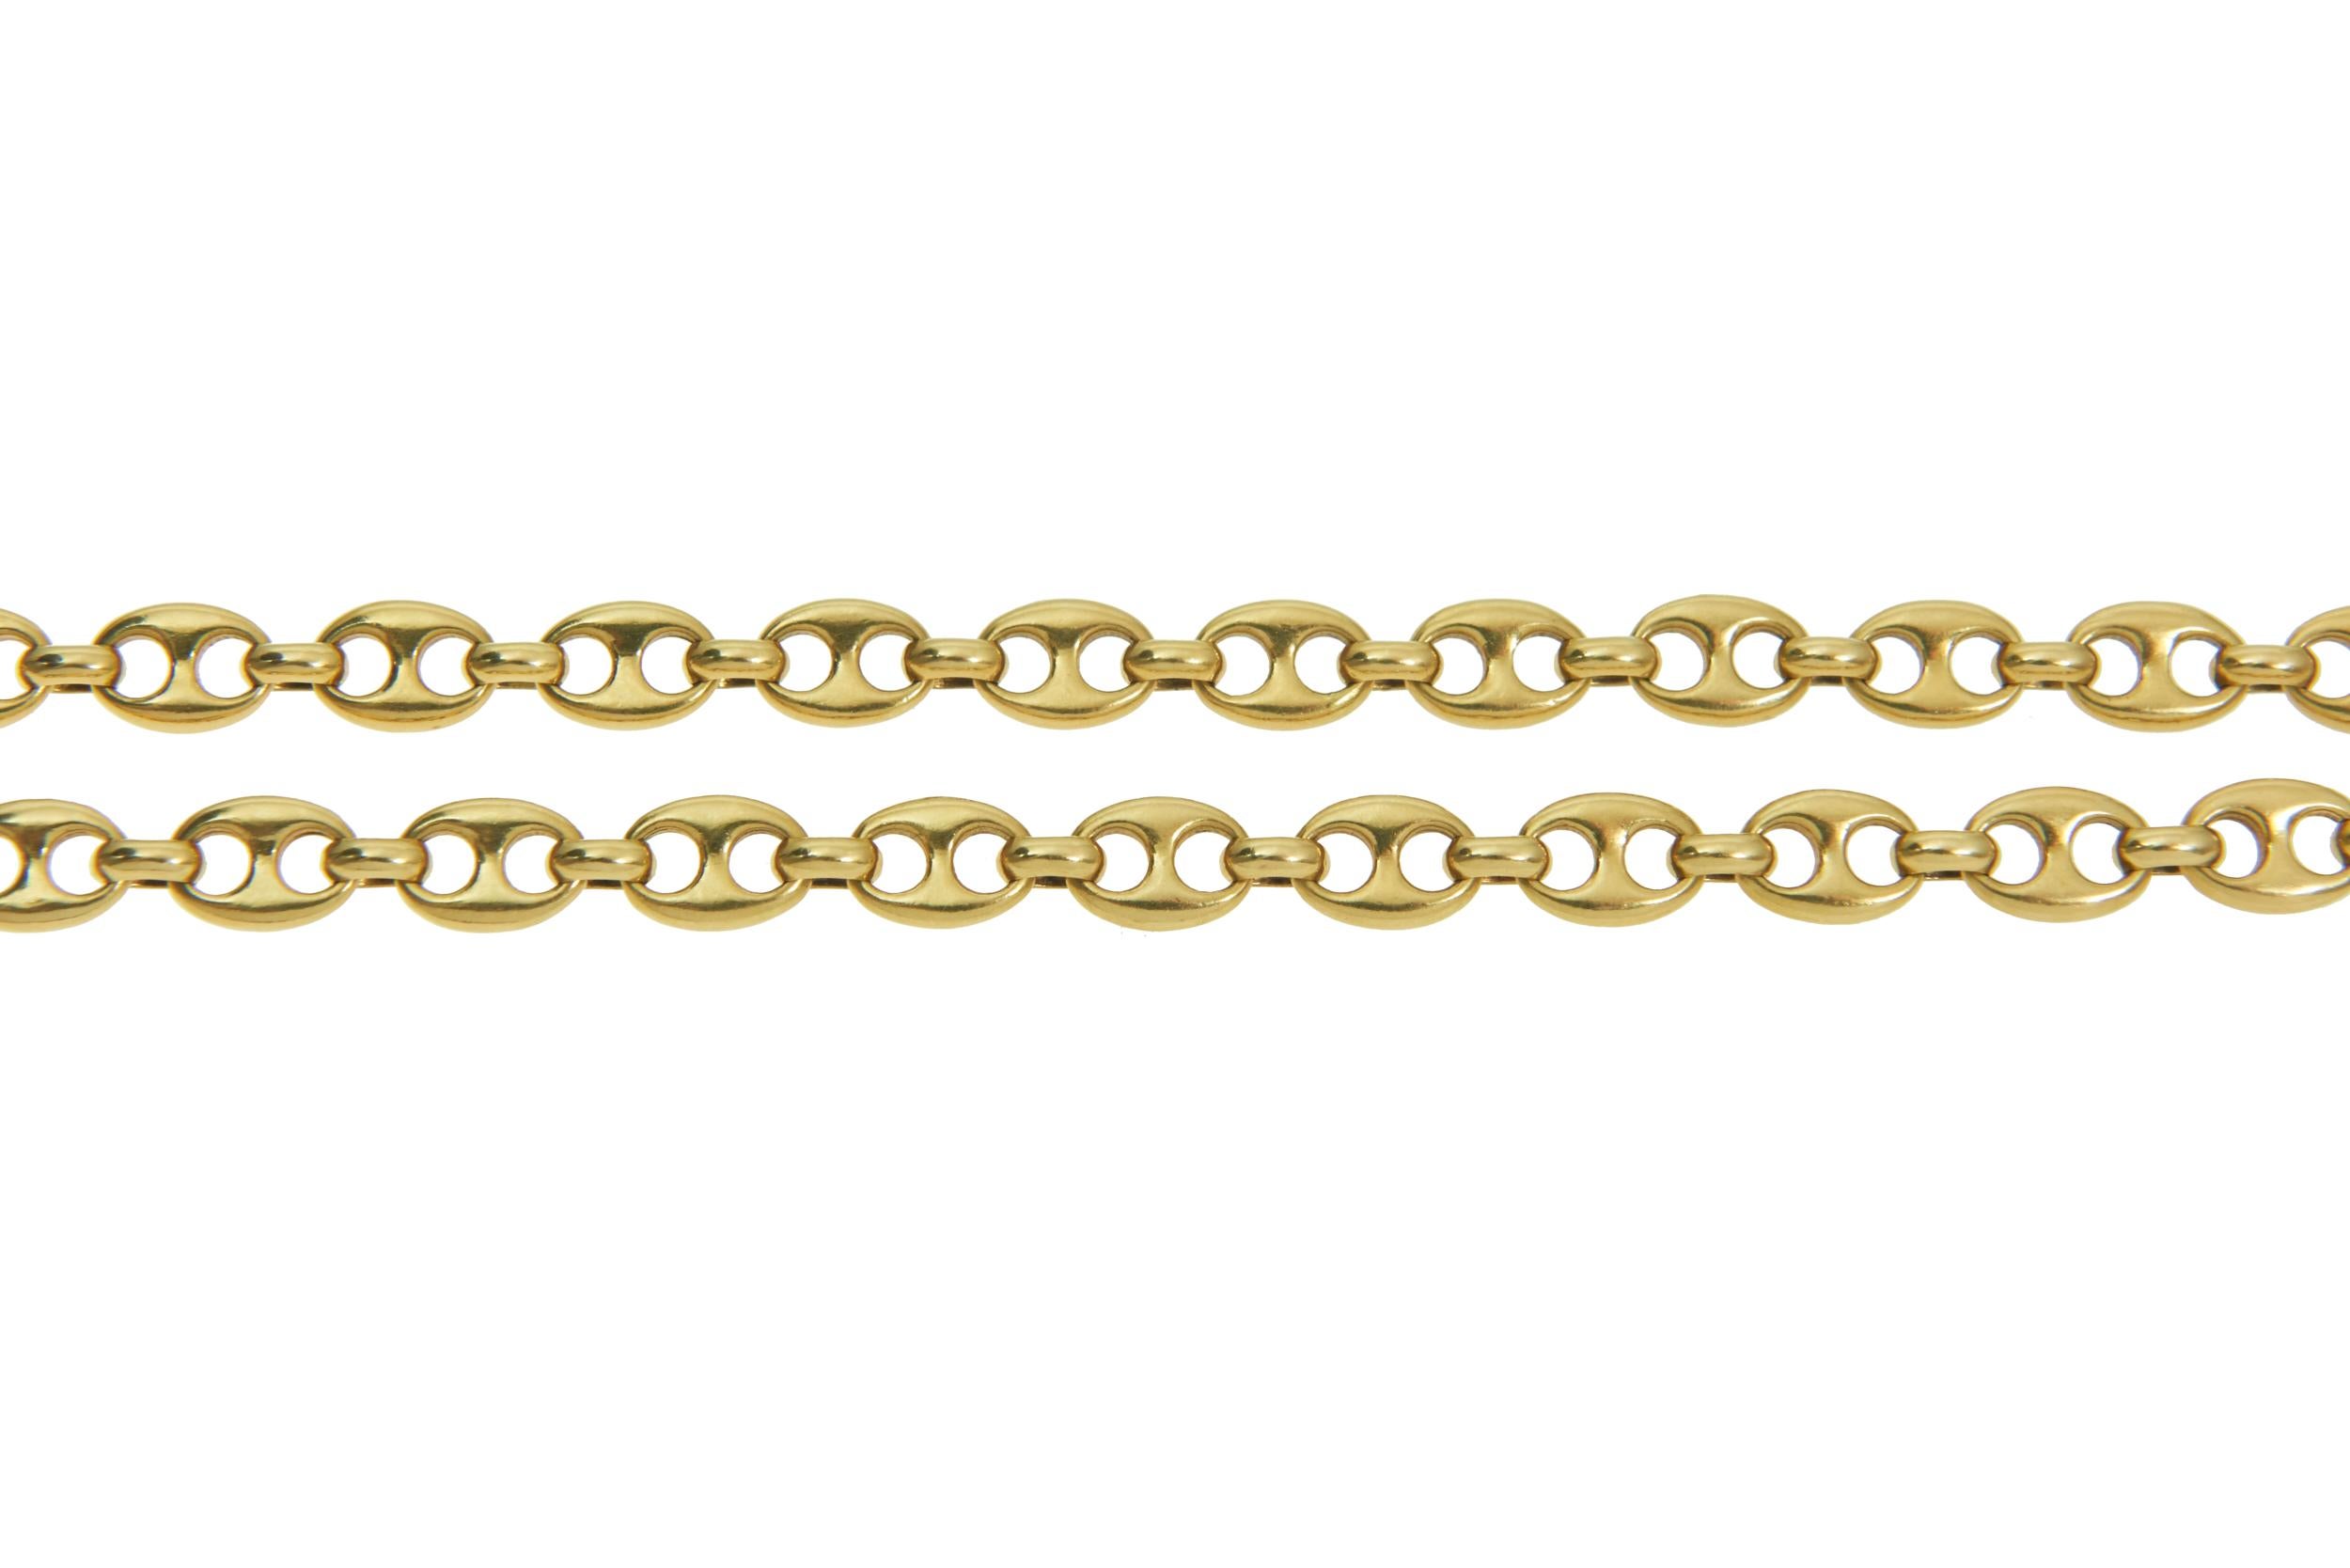 A long 18 karat gold Gucci-style anchor link chain, by Van Cleef & Arpels, c. 1975.

Chain measures 41